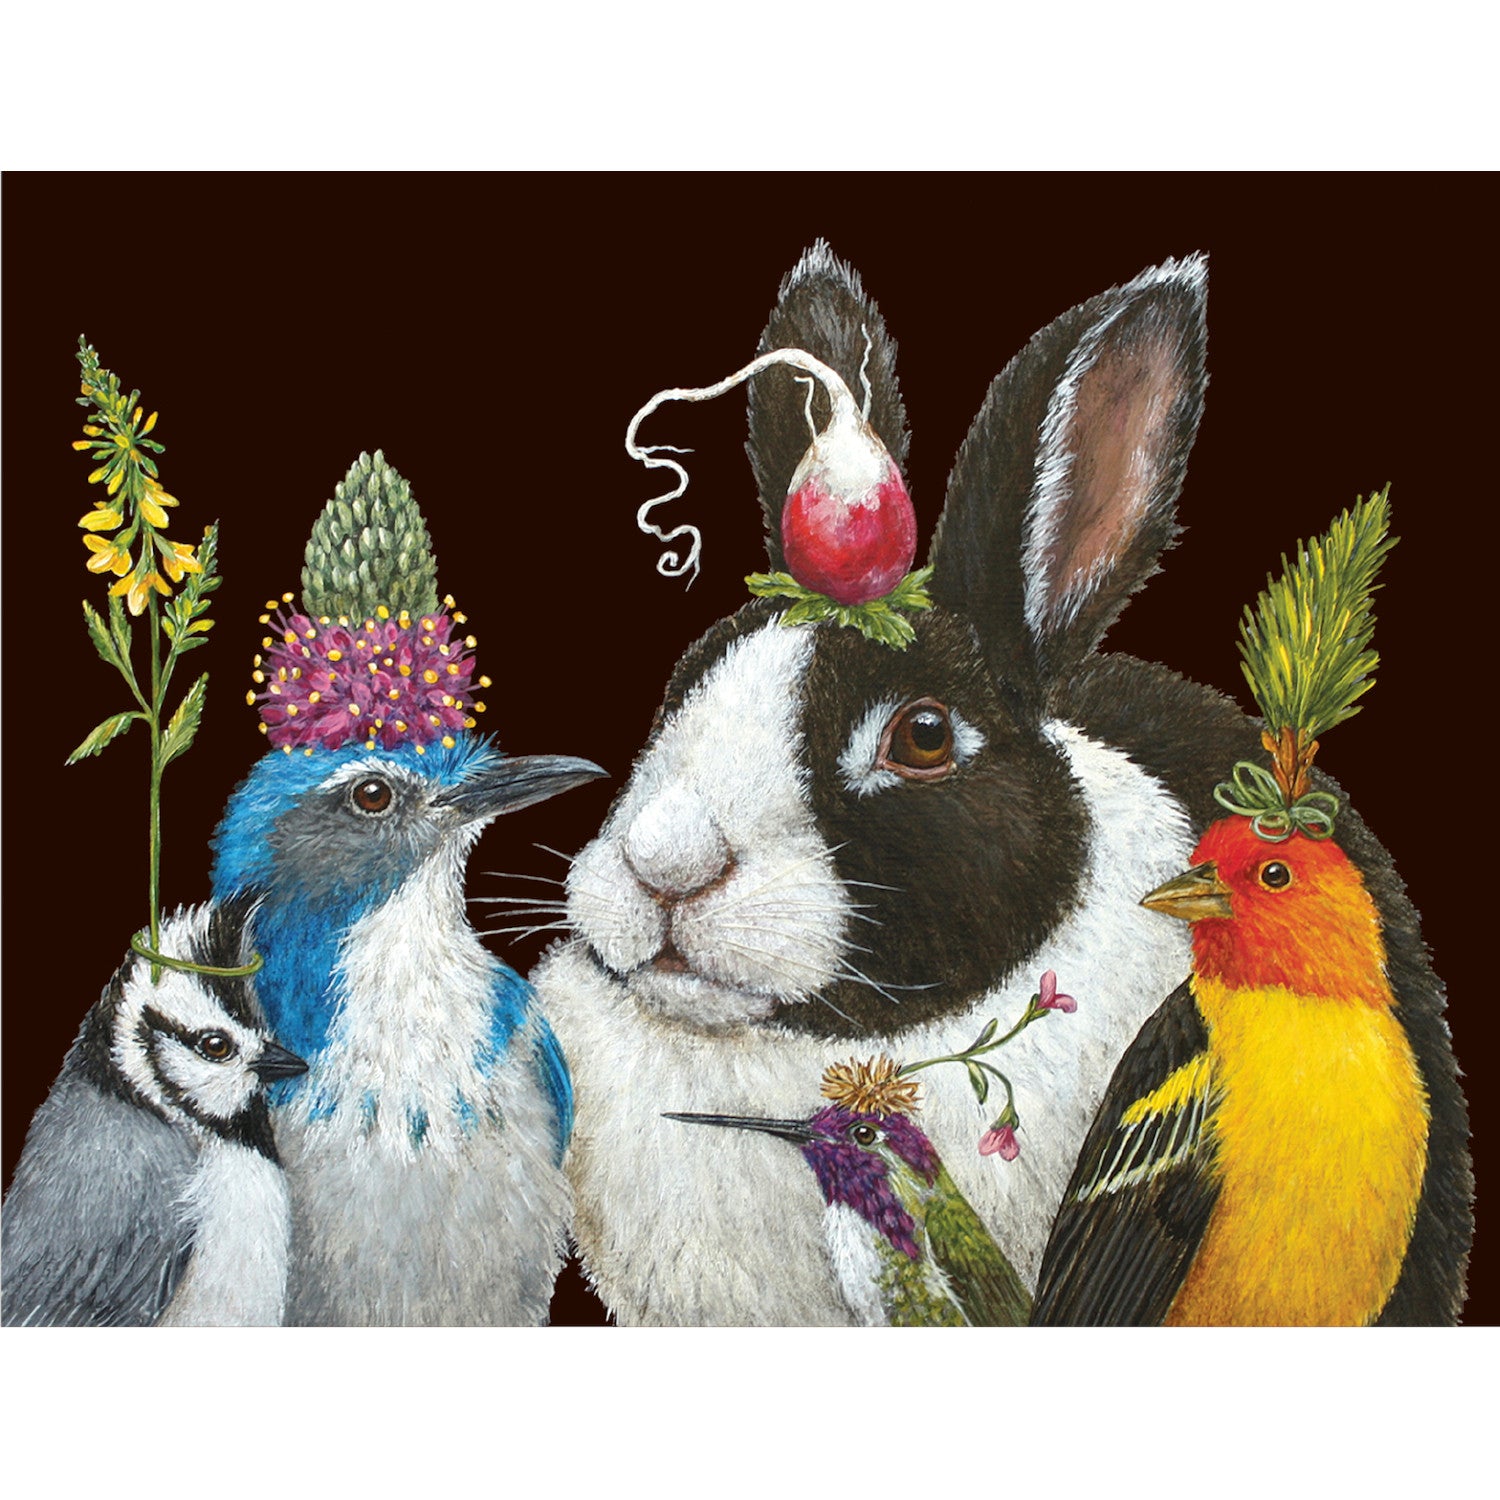 An artistic fun You Look Radishing Card featuring a bunny and a bird with flowers on their heads, complimented by a special message created by Hester &amp; Cook.